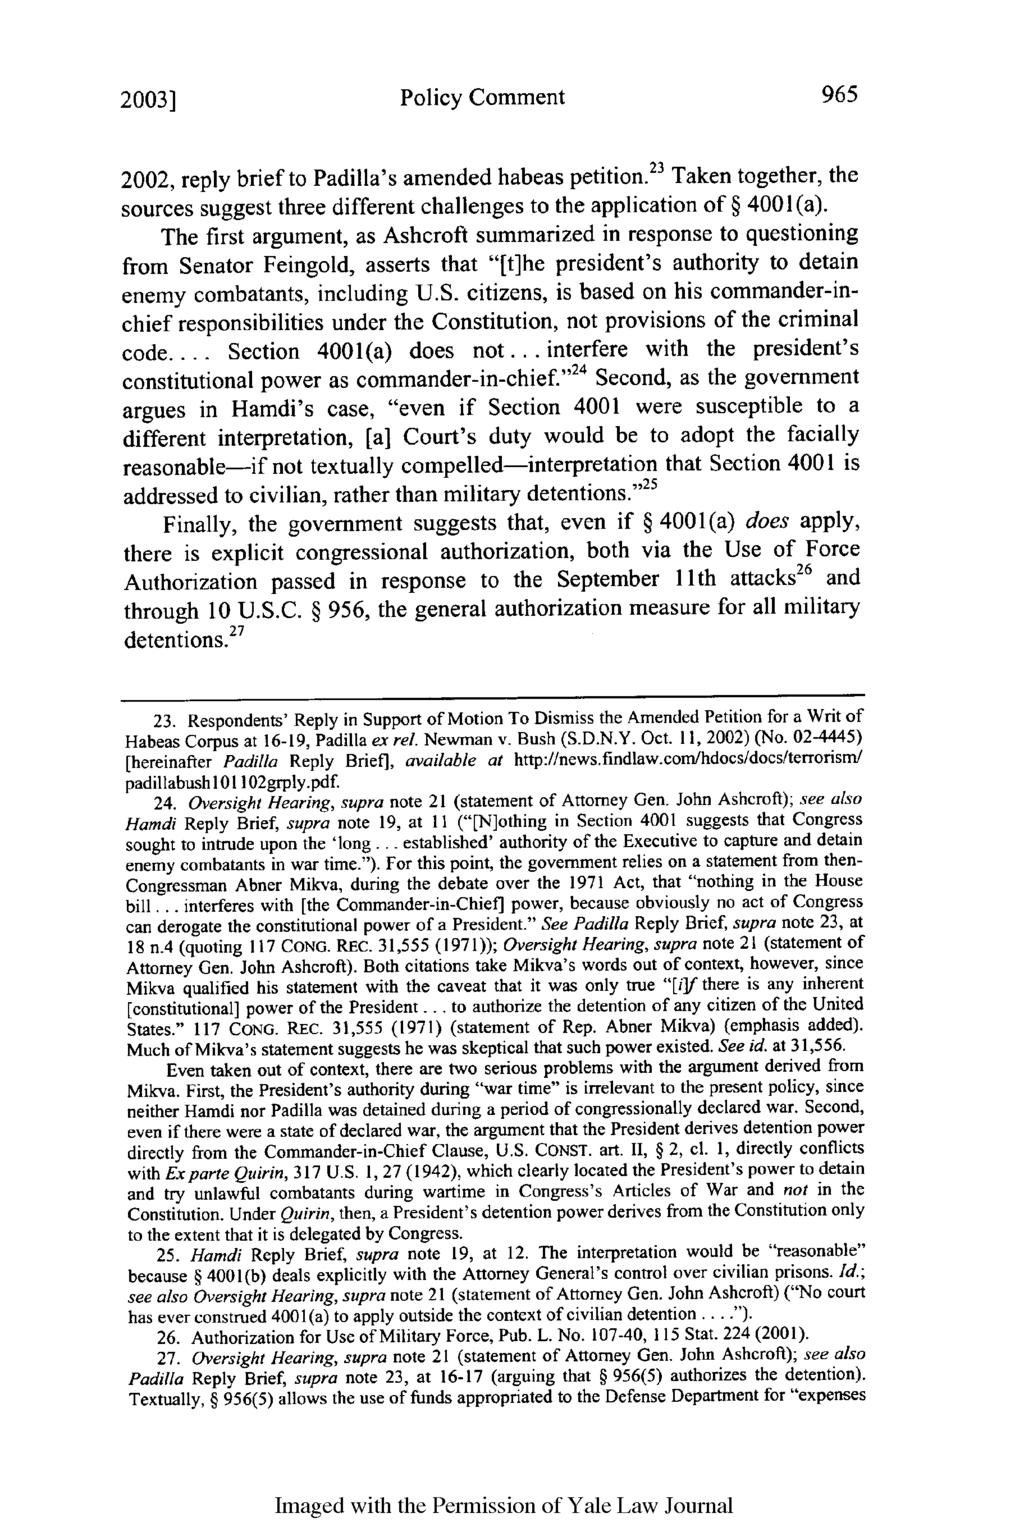 2003] Policy Comment 2002, reply brief to Padilla's amended habeas petition. 23 Taken together, the sources suggest three different challenges to the application of 4001 (a).